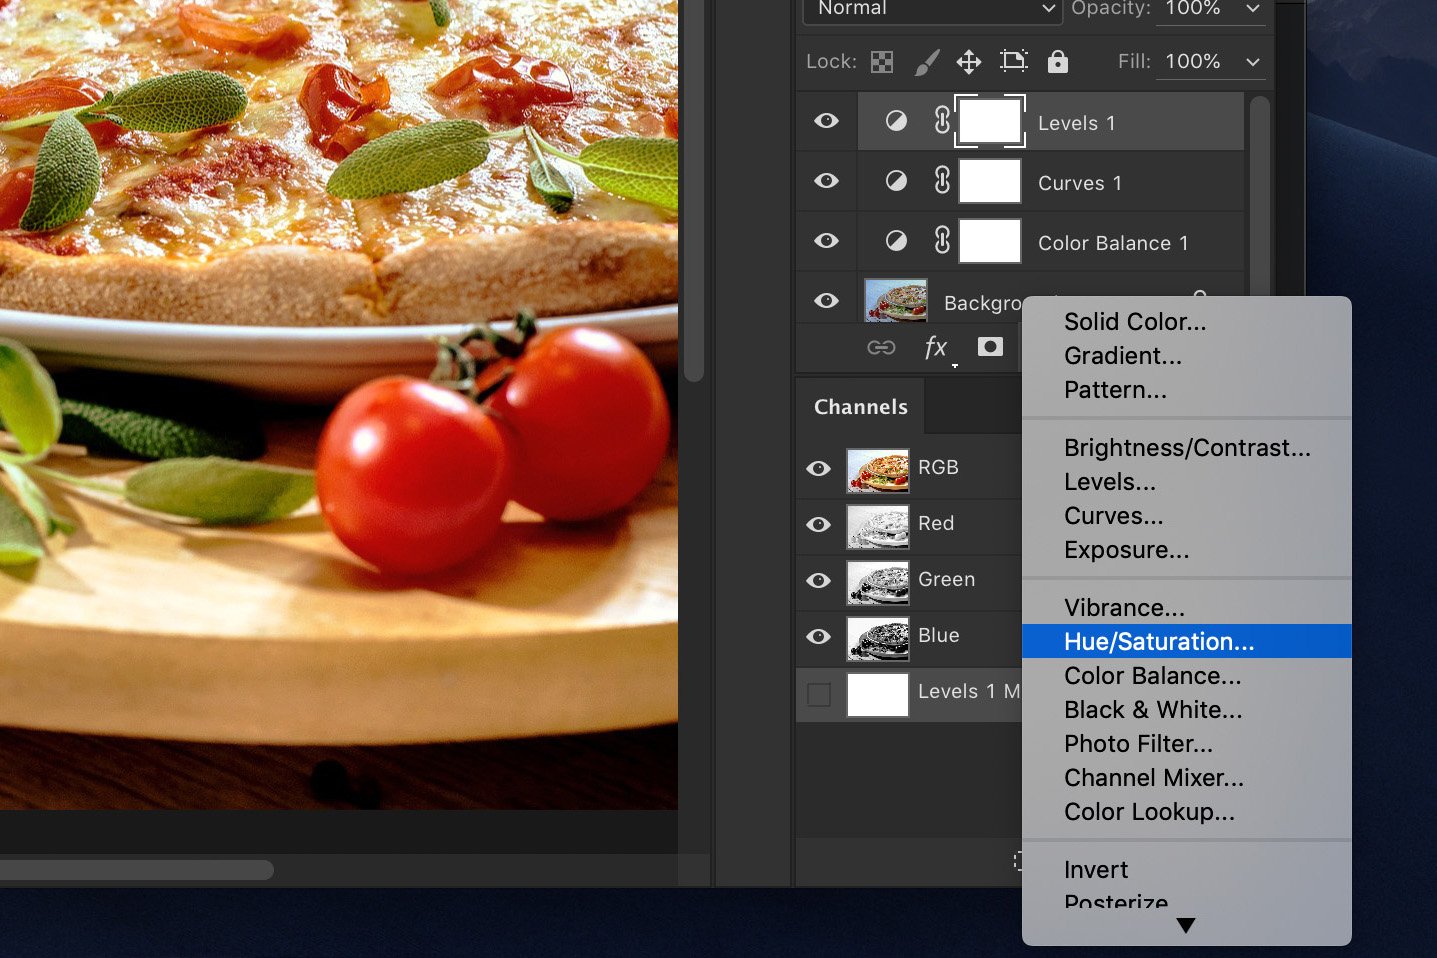 A screenshot showing how to edit food photography in Photoshop - Remove the Remaining Color Cast 